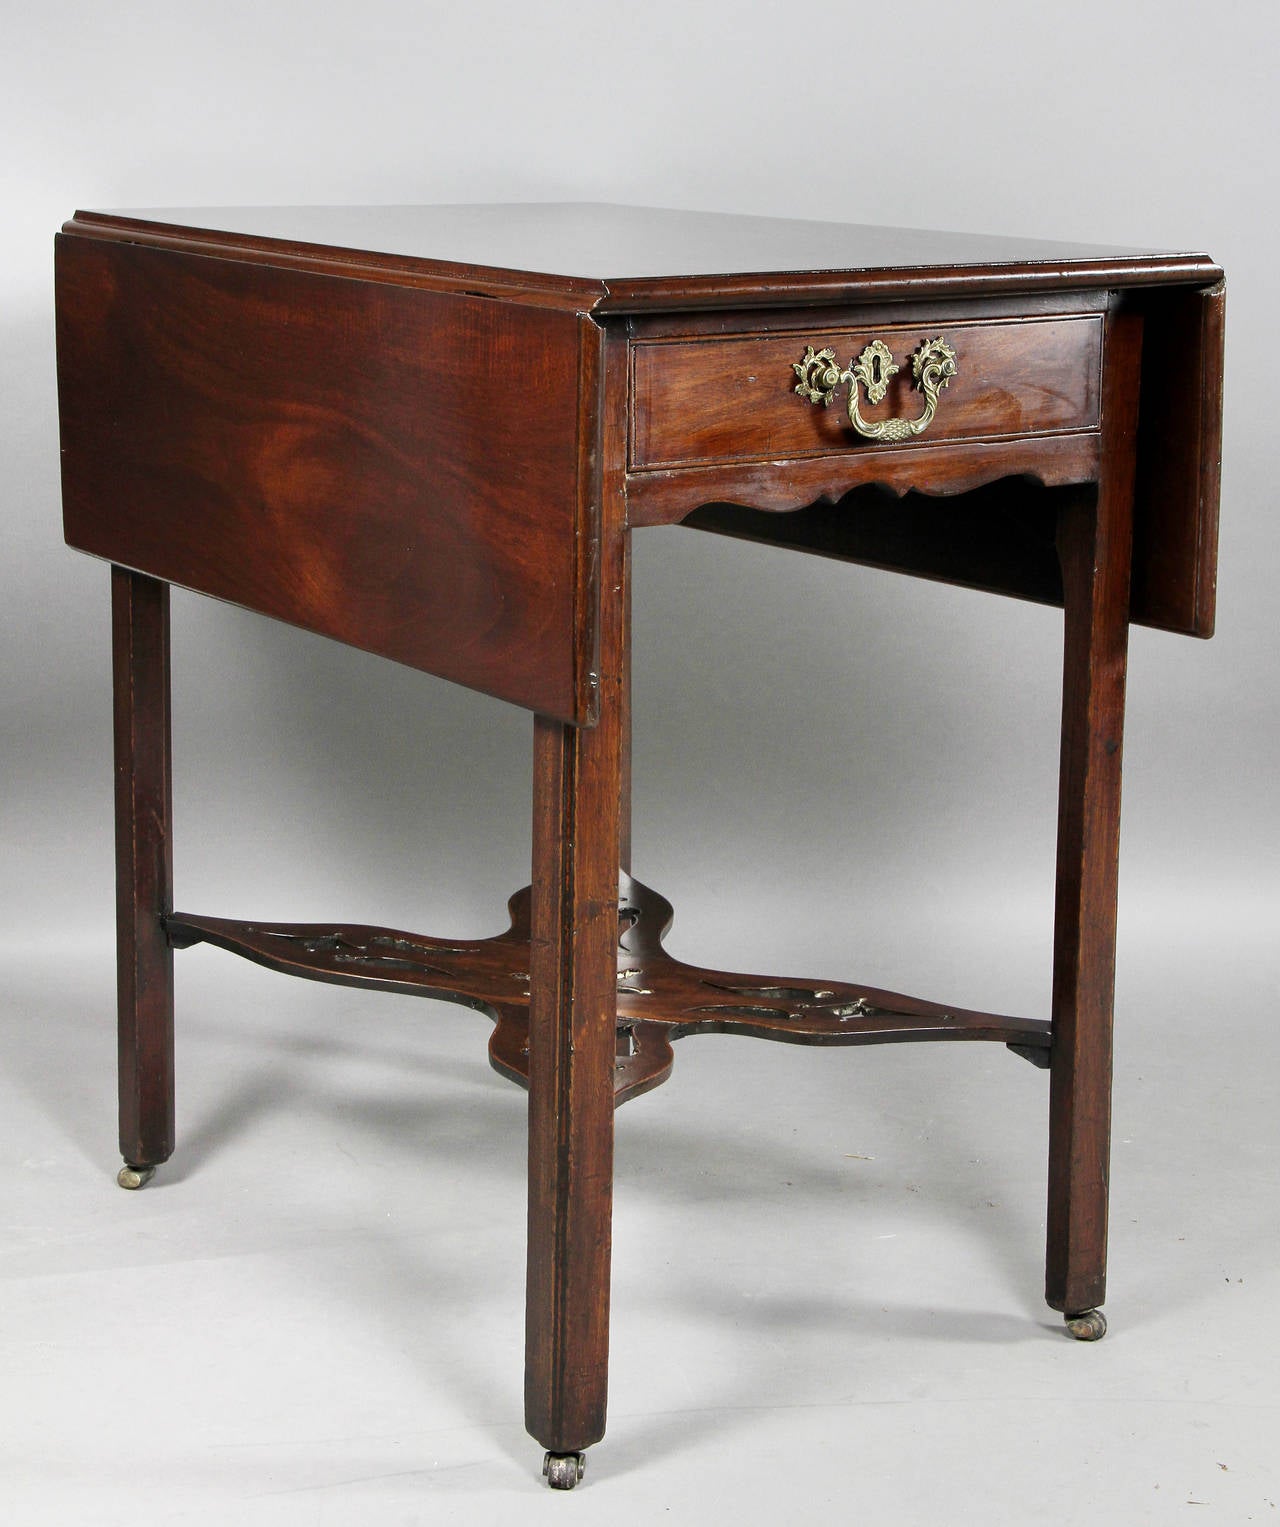 Rectangular with two drop leaves over a drawer, square legs with pierced X-stretcher, casters. Provenance; Stair And Co, NYC.